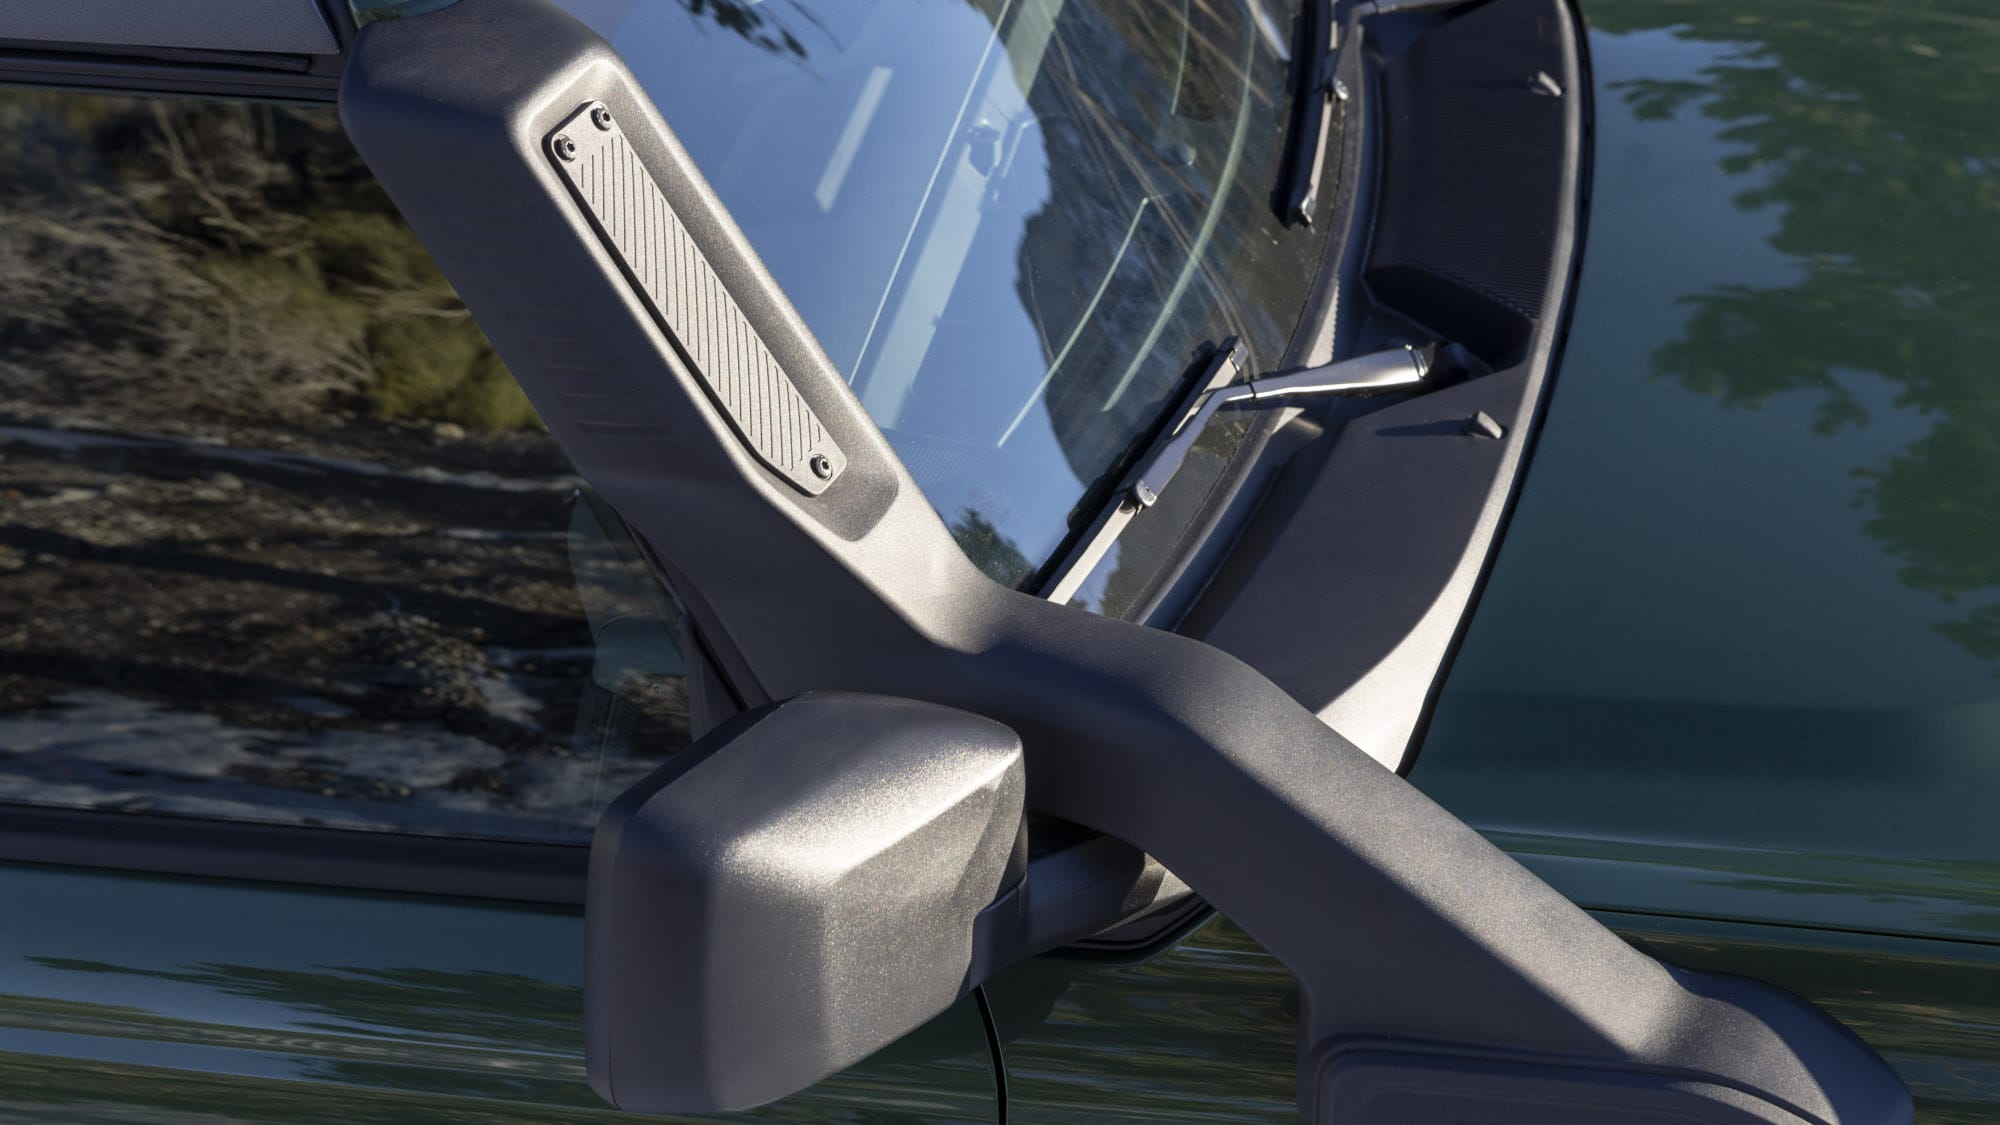 The snorkel system (snorkel) located on the passenger side.